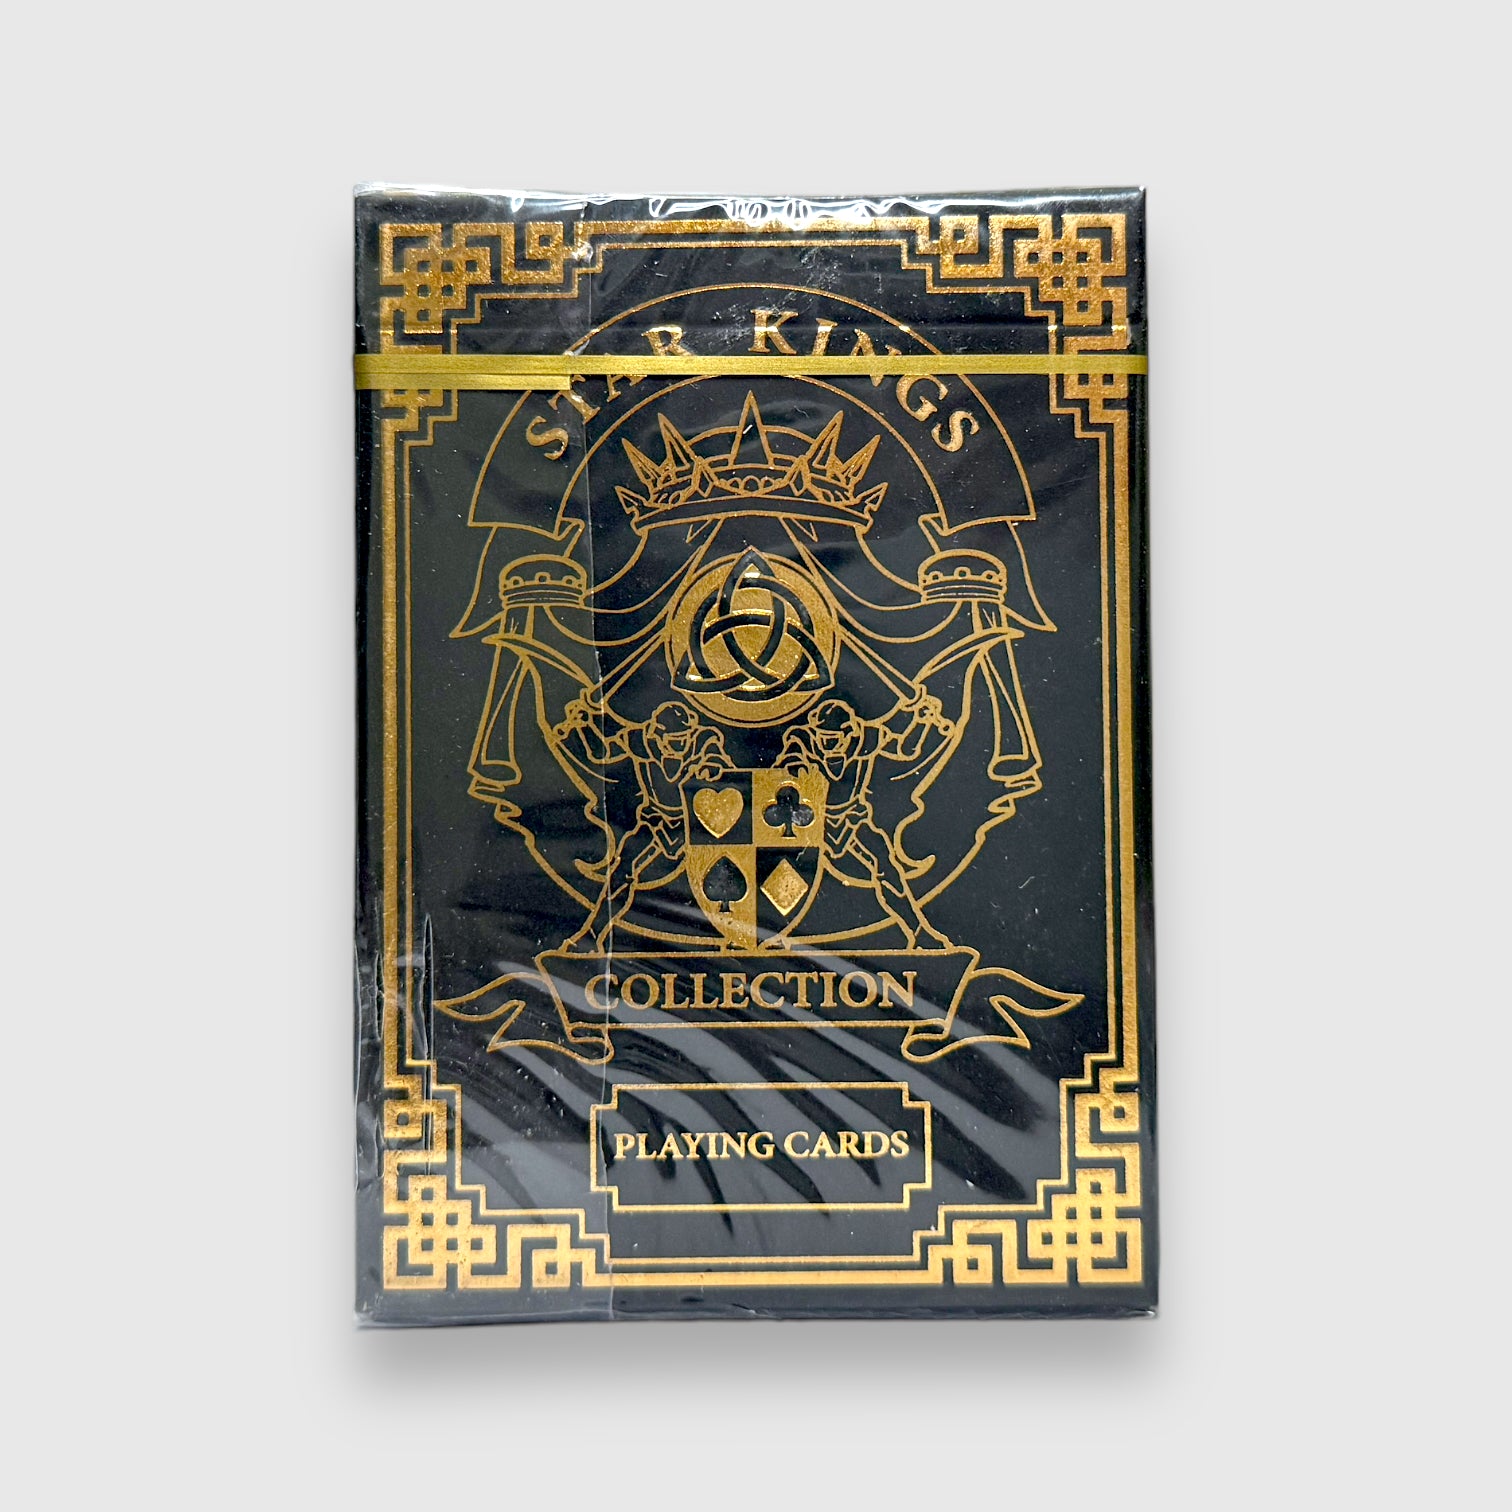 The Star Kings playing cards